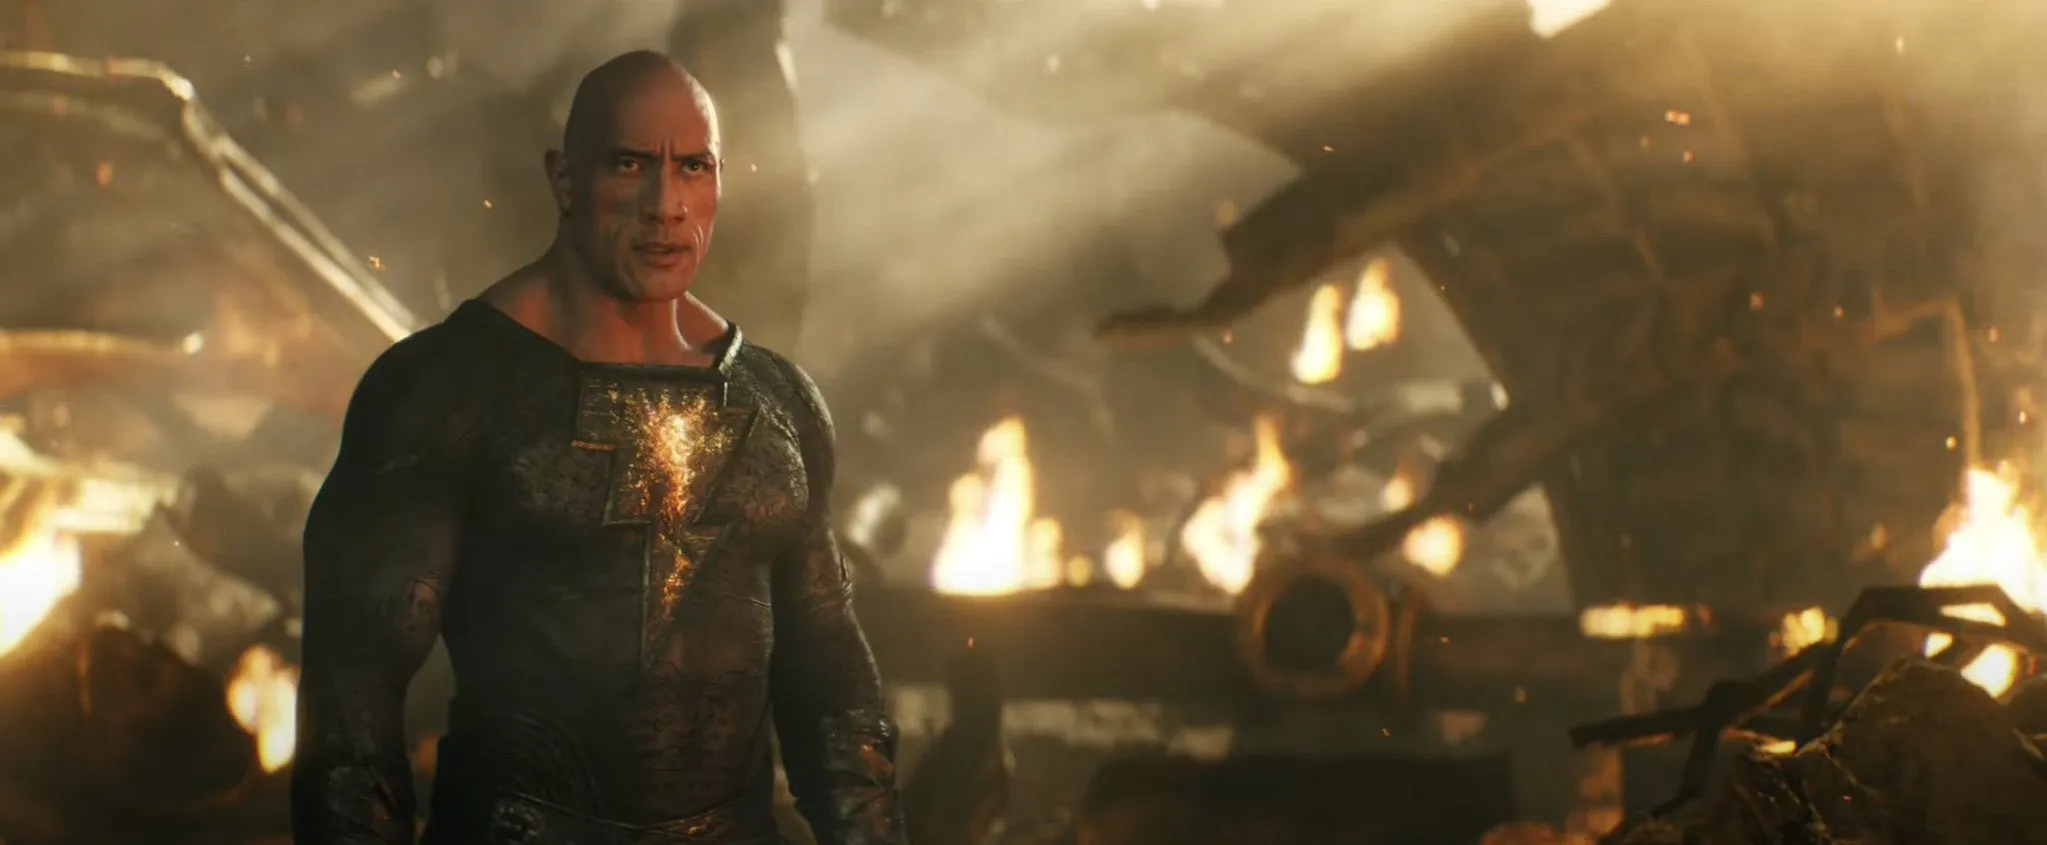 Black Adam" exposed SDCC version of the Chinese word trailer Henry Cavill did not appear at Comic-Con"Black Adam" exposed SDCC trailer, Henry Cavill did not show up at Comic-Con | FMV6